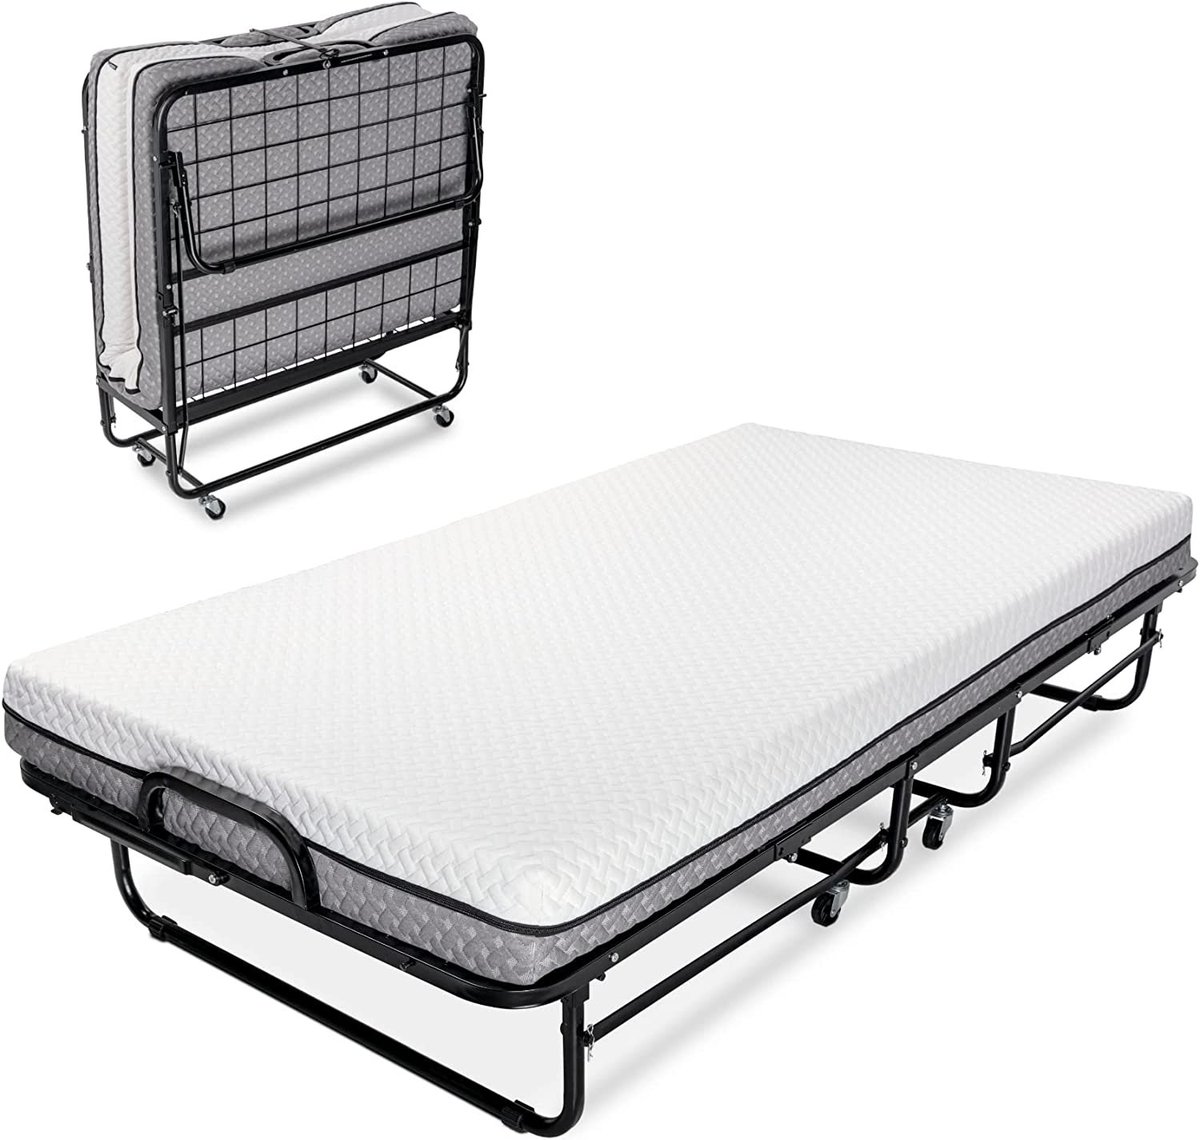 14 Fold Away Beds Reviews - 2023 Comparison
beobestreviews.com/fold-away-beds/

#foldingbed #guestbed #multifunctionalfurniture #spaceefficient #designinspo #easytouse #comfortable #sleepeasy #qualityfurniture